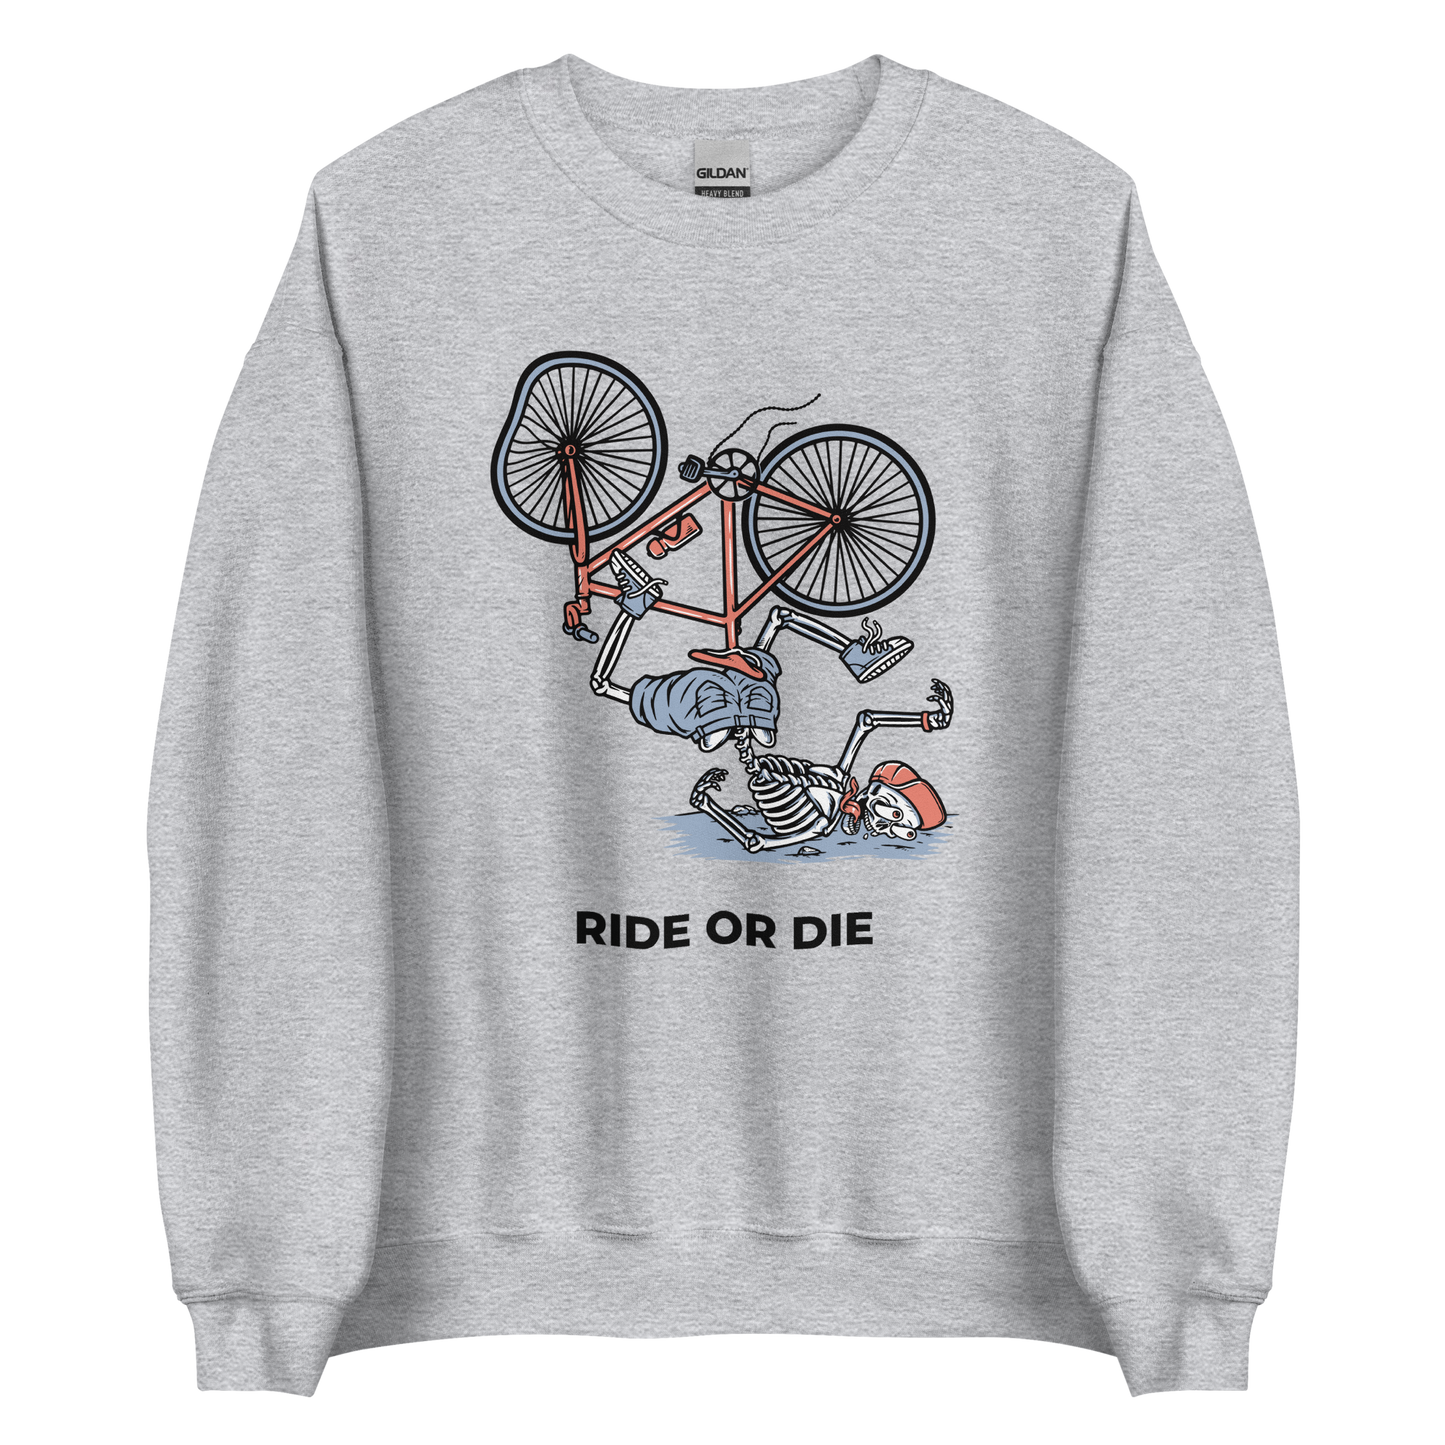 Sport Grey Ride or Die Sweatshirt featuring a bold Skeleton Falling While Riding a Bicycle graphic on the chest - Funny Graphic Skeleton Sweatshirts - Boozy Fox